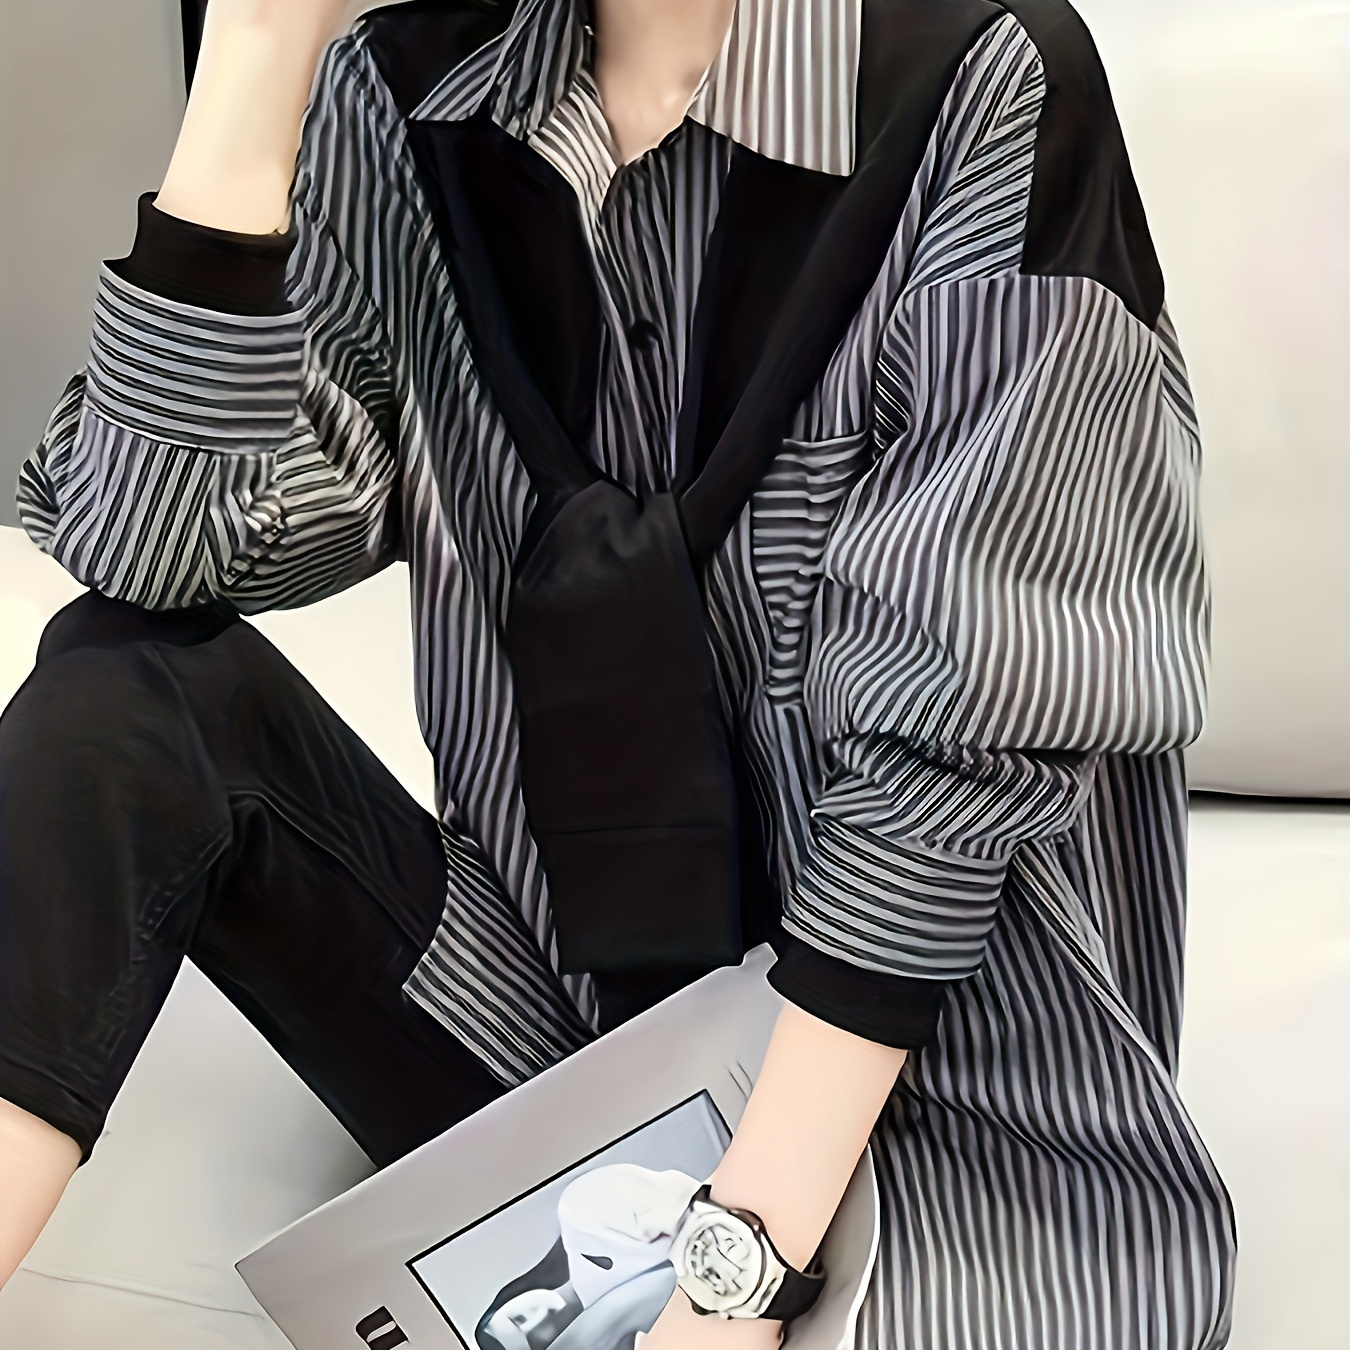 

Striped Print Color Block Shirt, Casual Long Sleeve Splicing Shirt For Spring & Fall, Women's Clothing